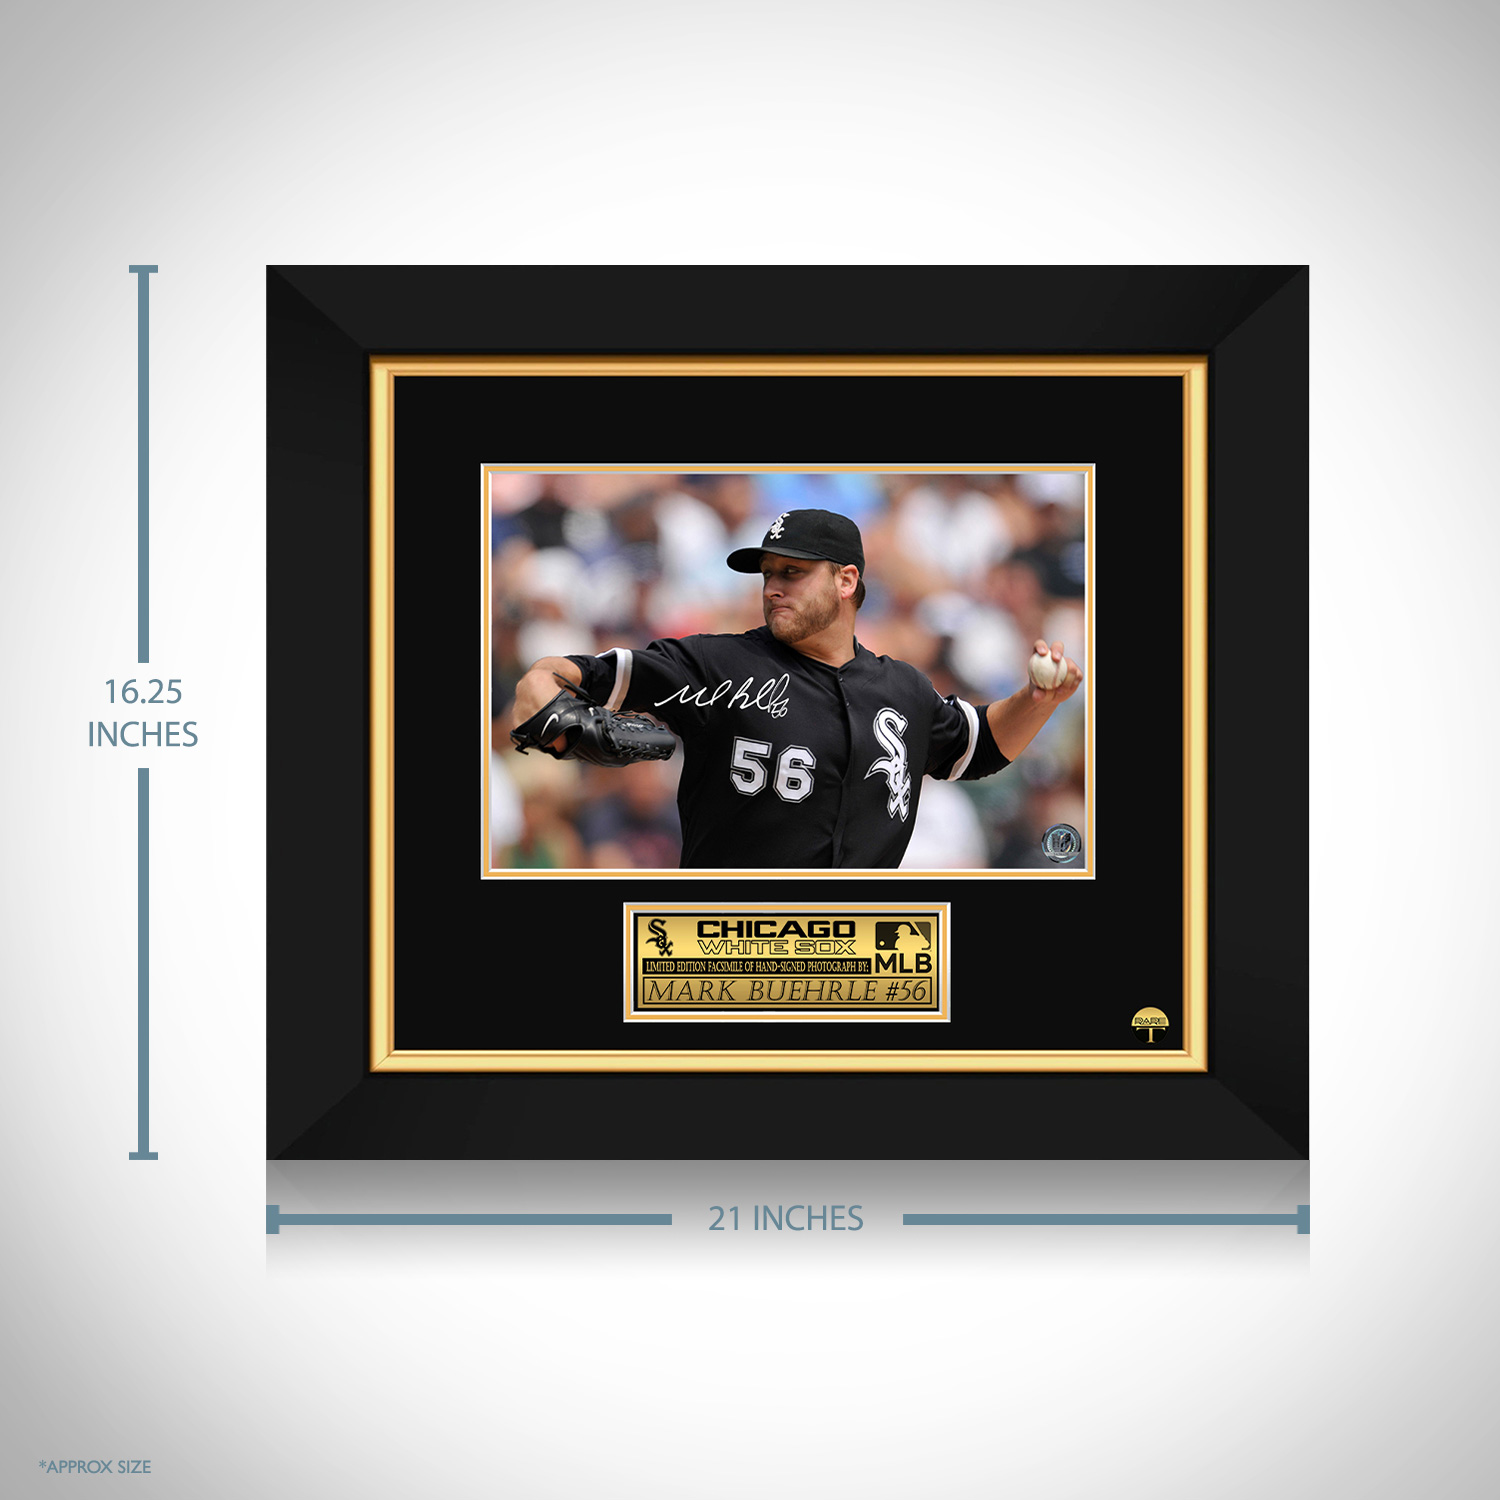 MARK BUEHRLE Jersey Photo Picture Art CHICAGO WHITE SOX - 8x10 11x14 16x20